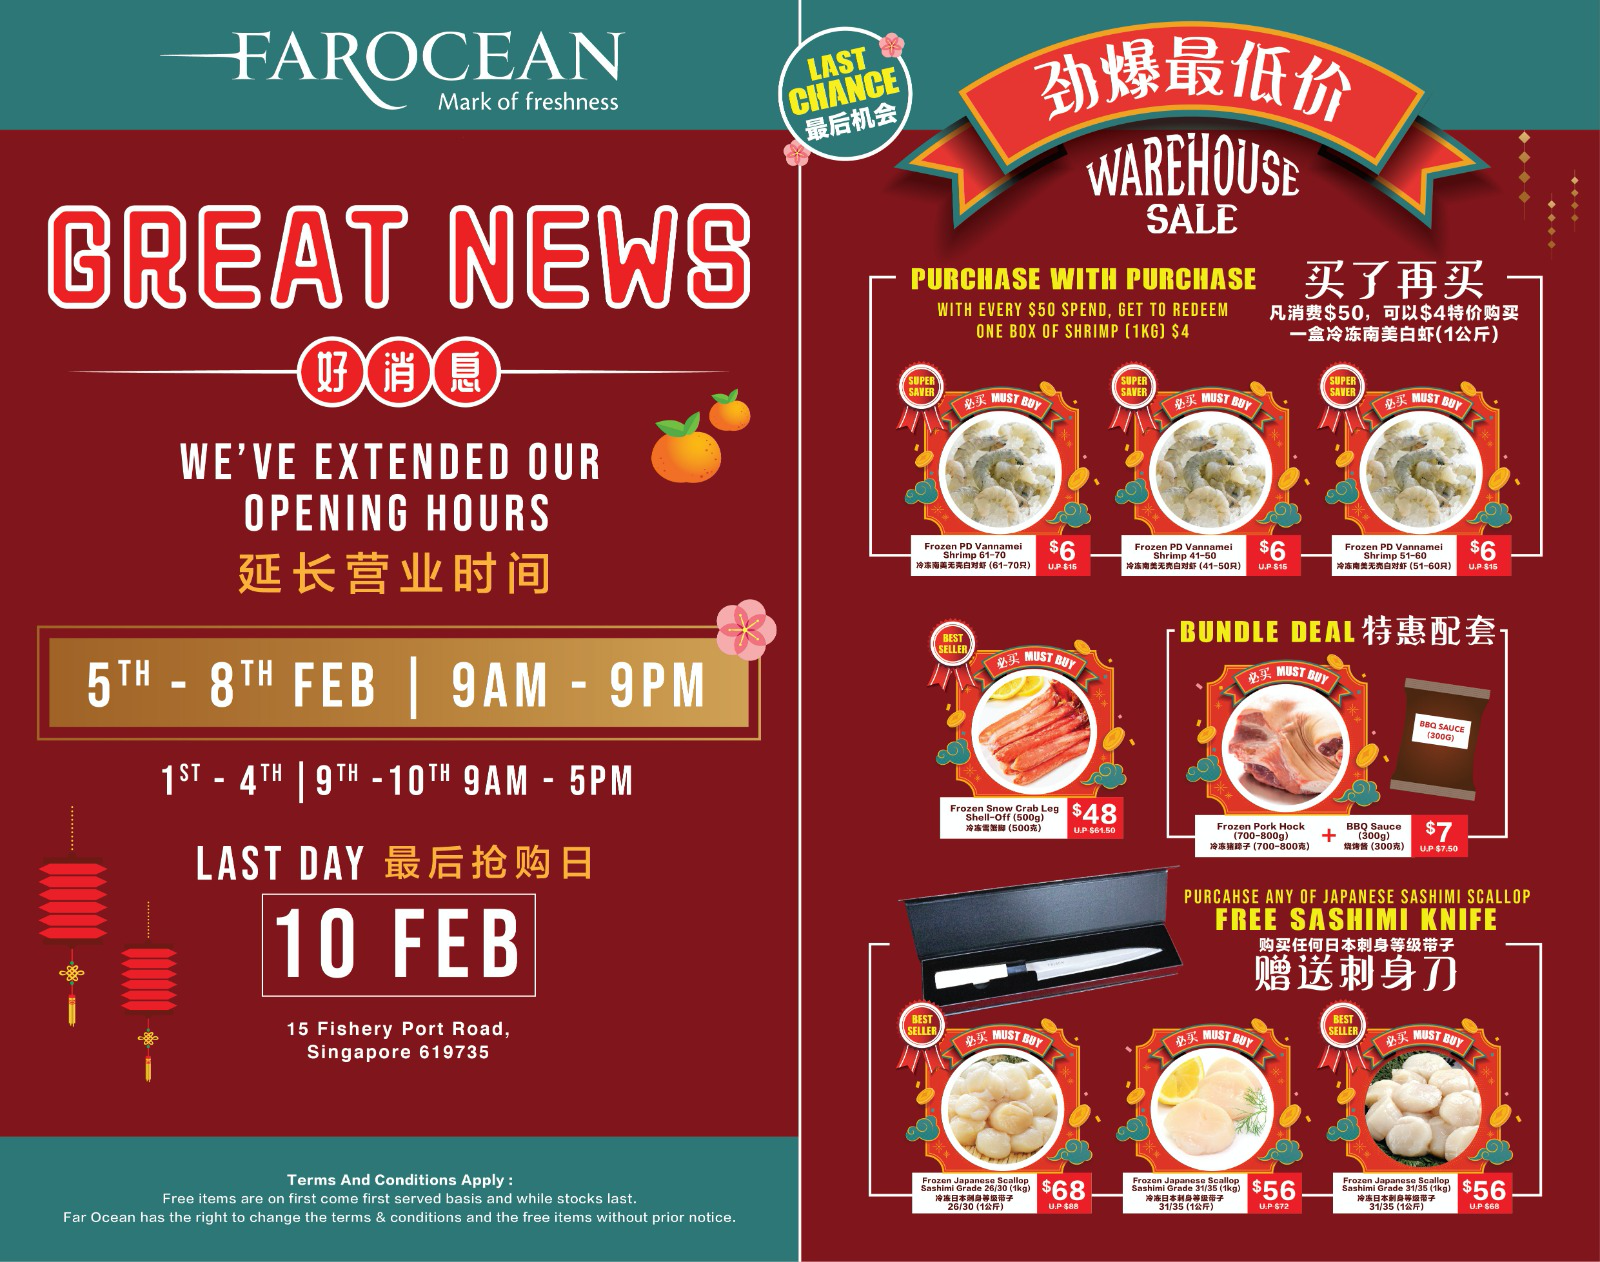 EVERYTHING MUST GO! LAST chance to enjoy BIGGER and BETTER deals, with extended operating hours, only at Far Ocean CNY Warehouse Sale!